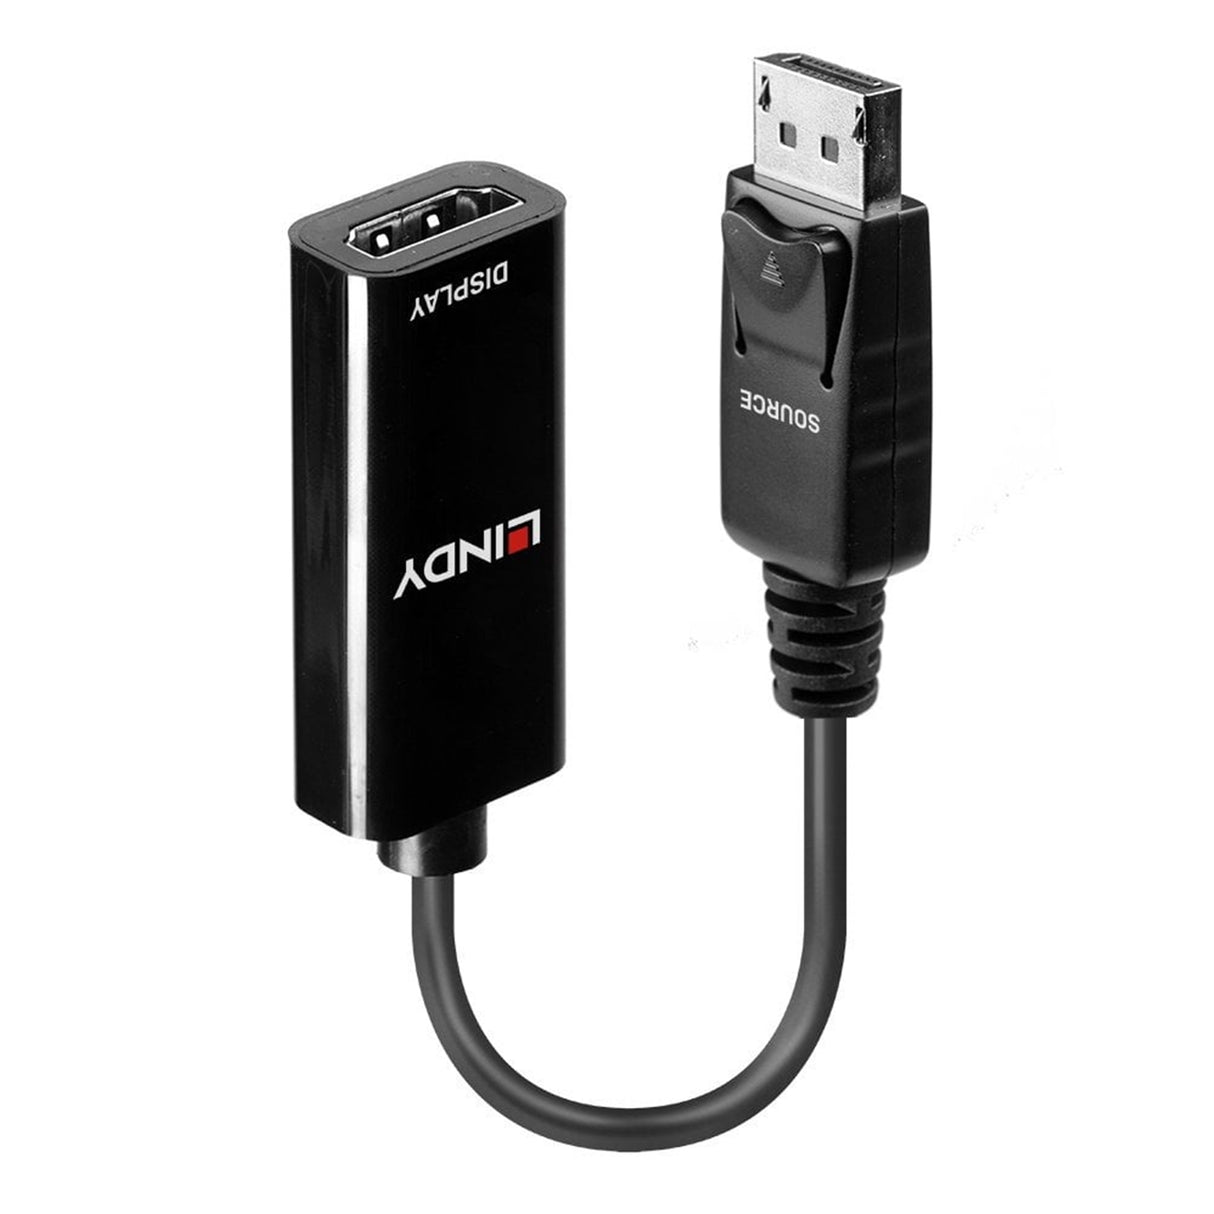 LINDY 41718 Converter, DisplayPort 1.2 (M) to HDMI 1.4 (F), 0.15m Adapter, Black & Red, Supports Resolutions up to 4K 3840x2160@30Hz, Quick & Simple Plug-and-Play Installation, Retail Polybag Packaging